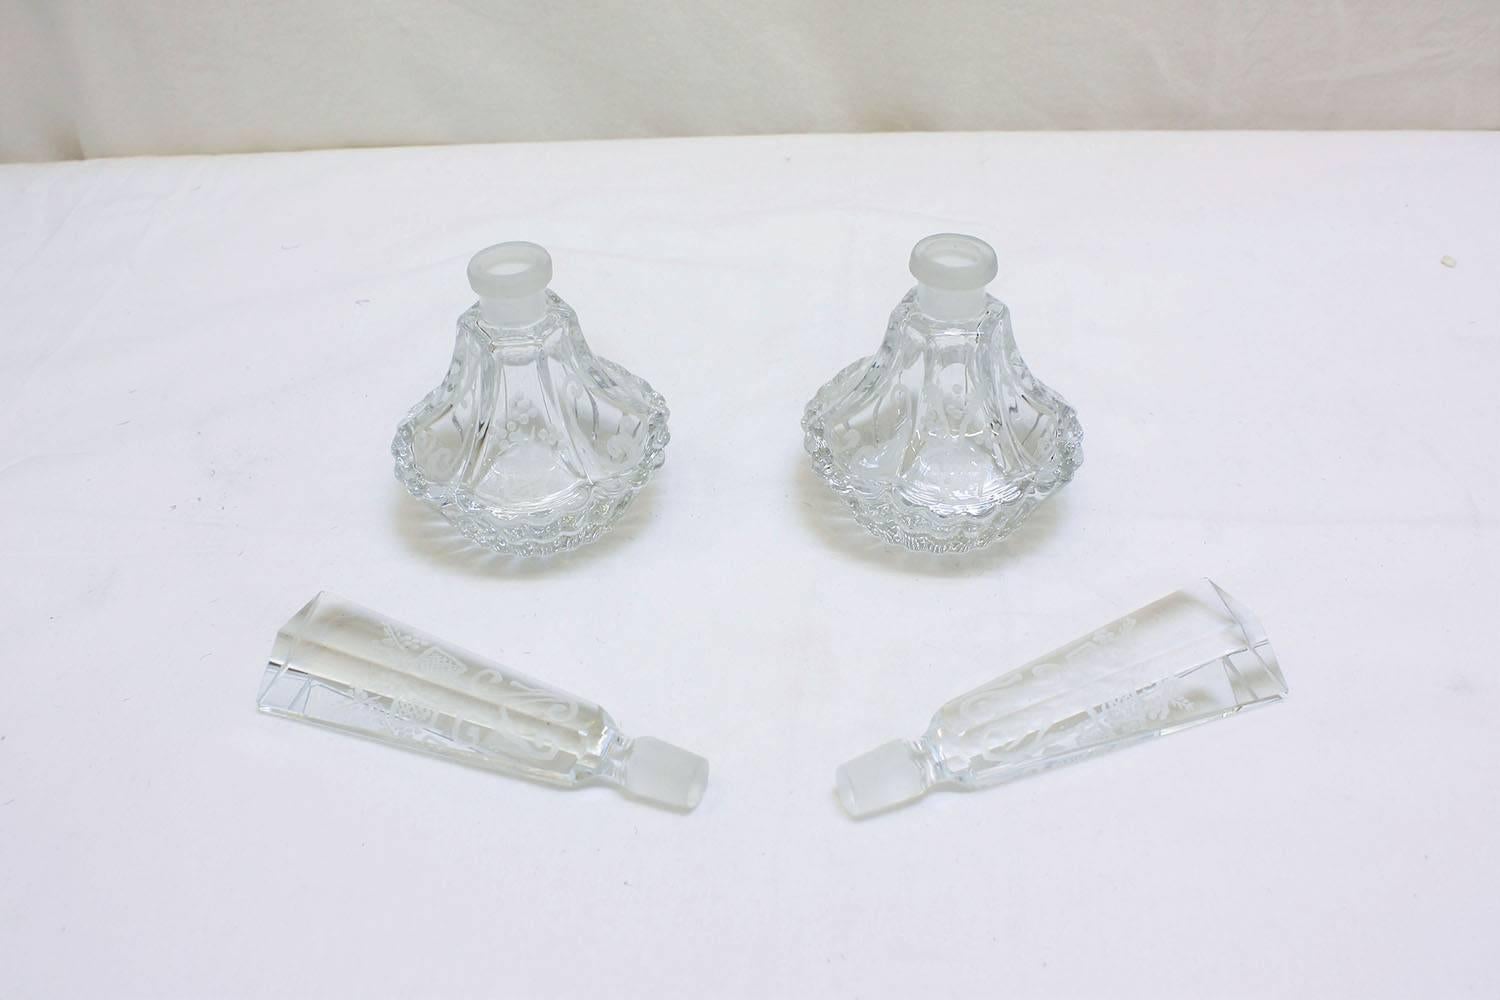 This pair of 1900s Baccarat perfume bottles are made of crystal. The faceted crystal features a scalloped edge and etched details. The handles and bottles are adorned with flowers, baskets, and scroll details. This pair of bottles are stunning and